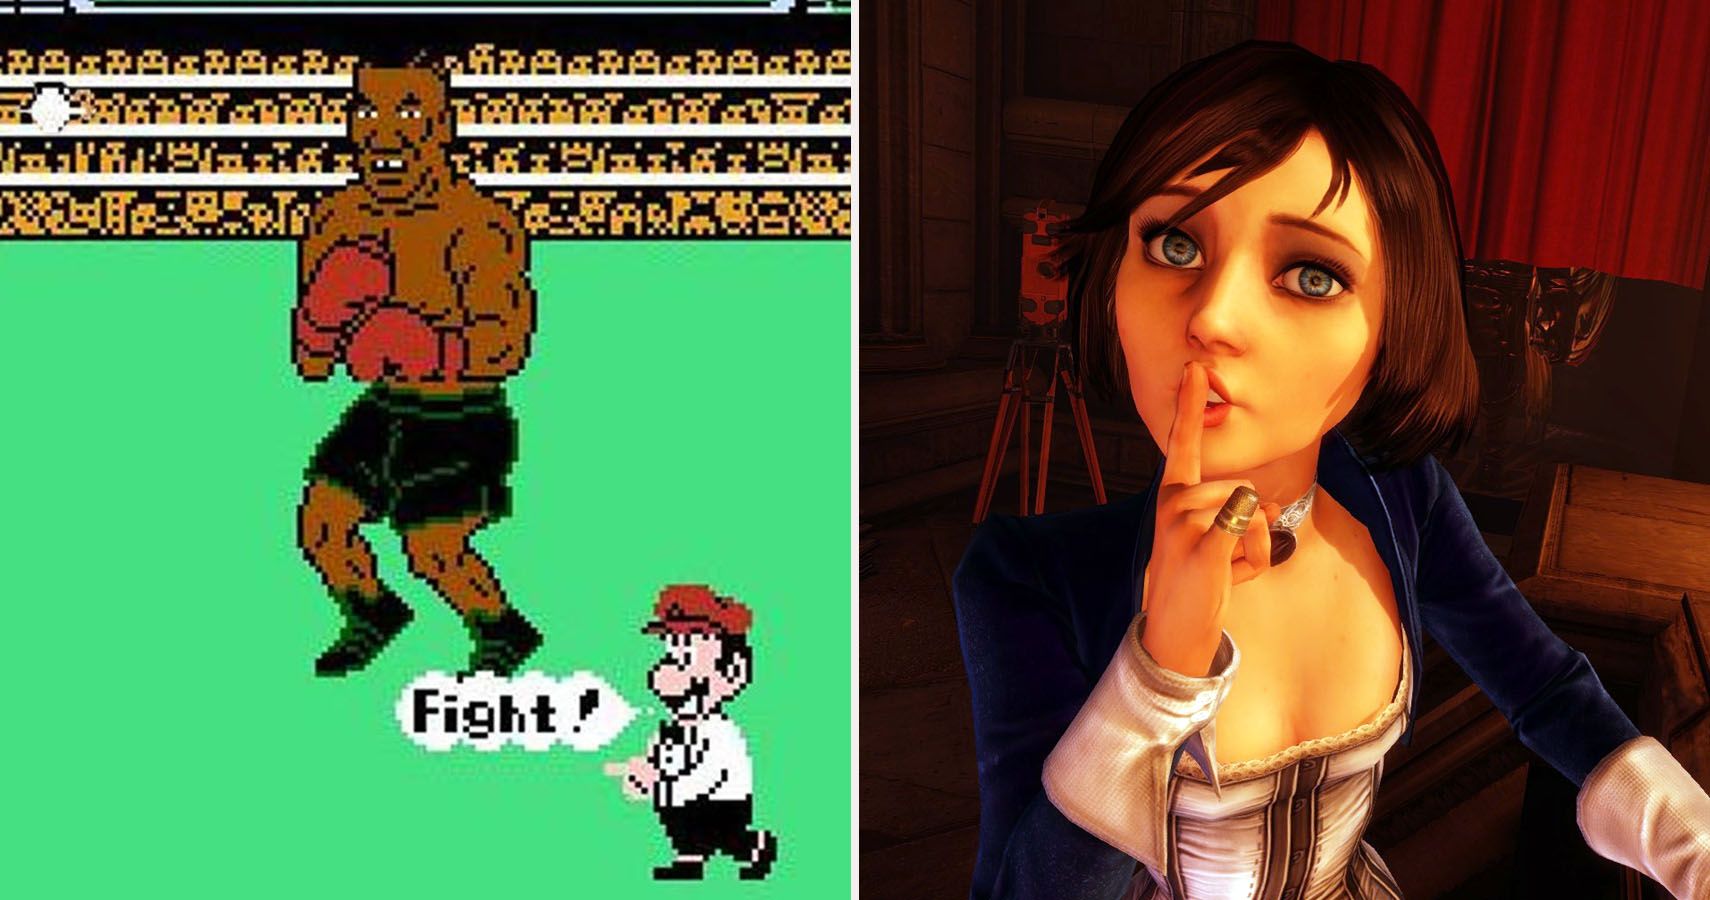 Hidden Messages In Classic Games They Don't Think You'll Notice